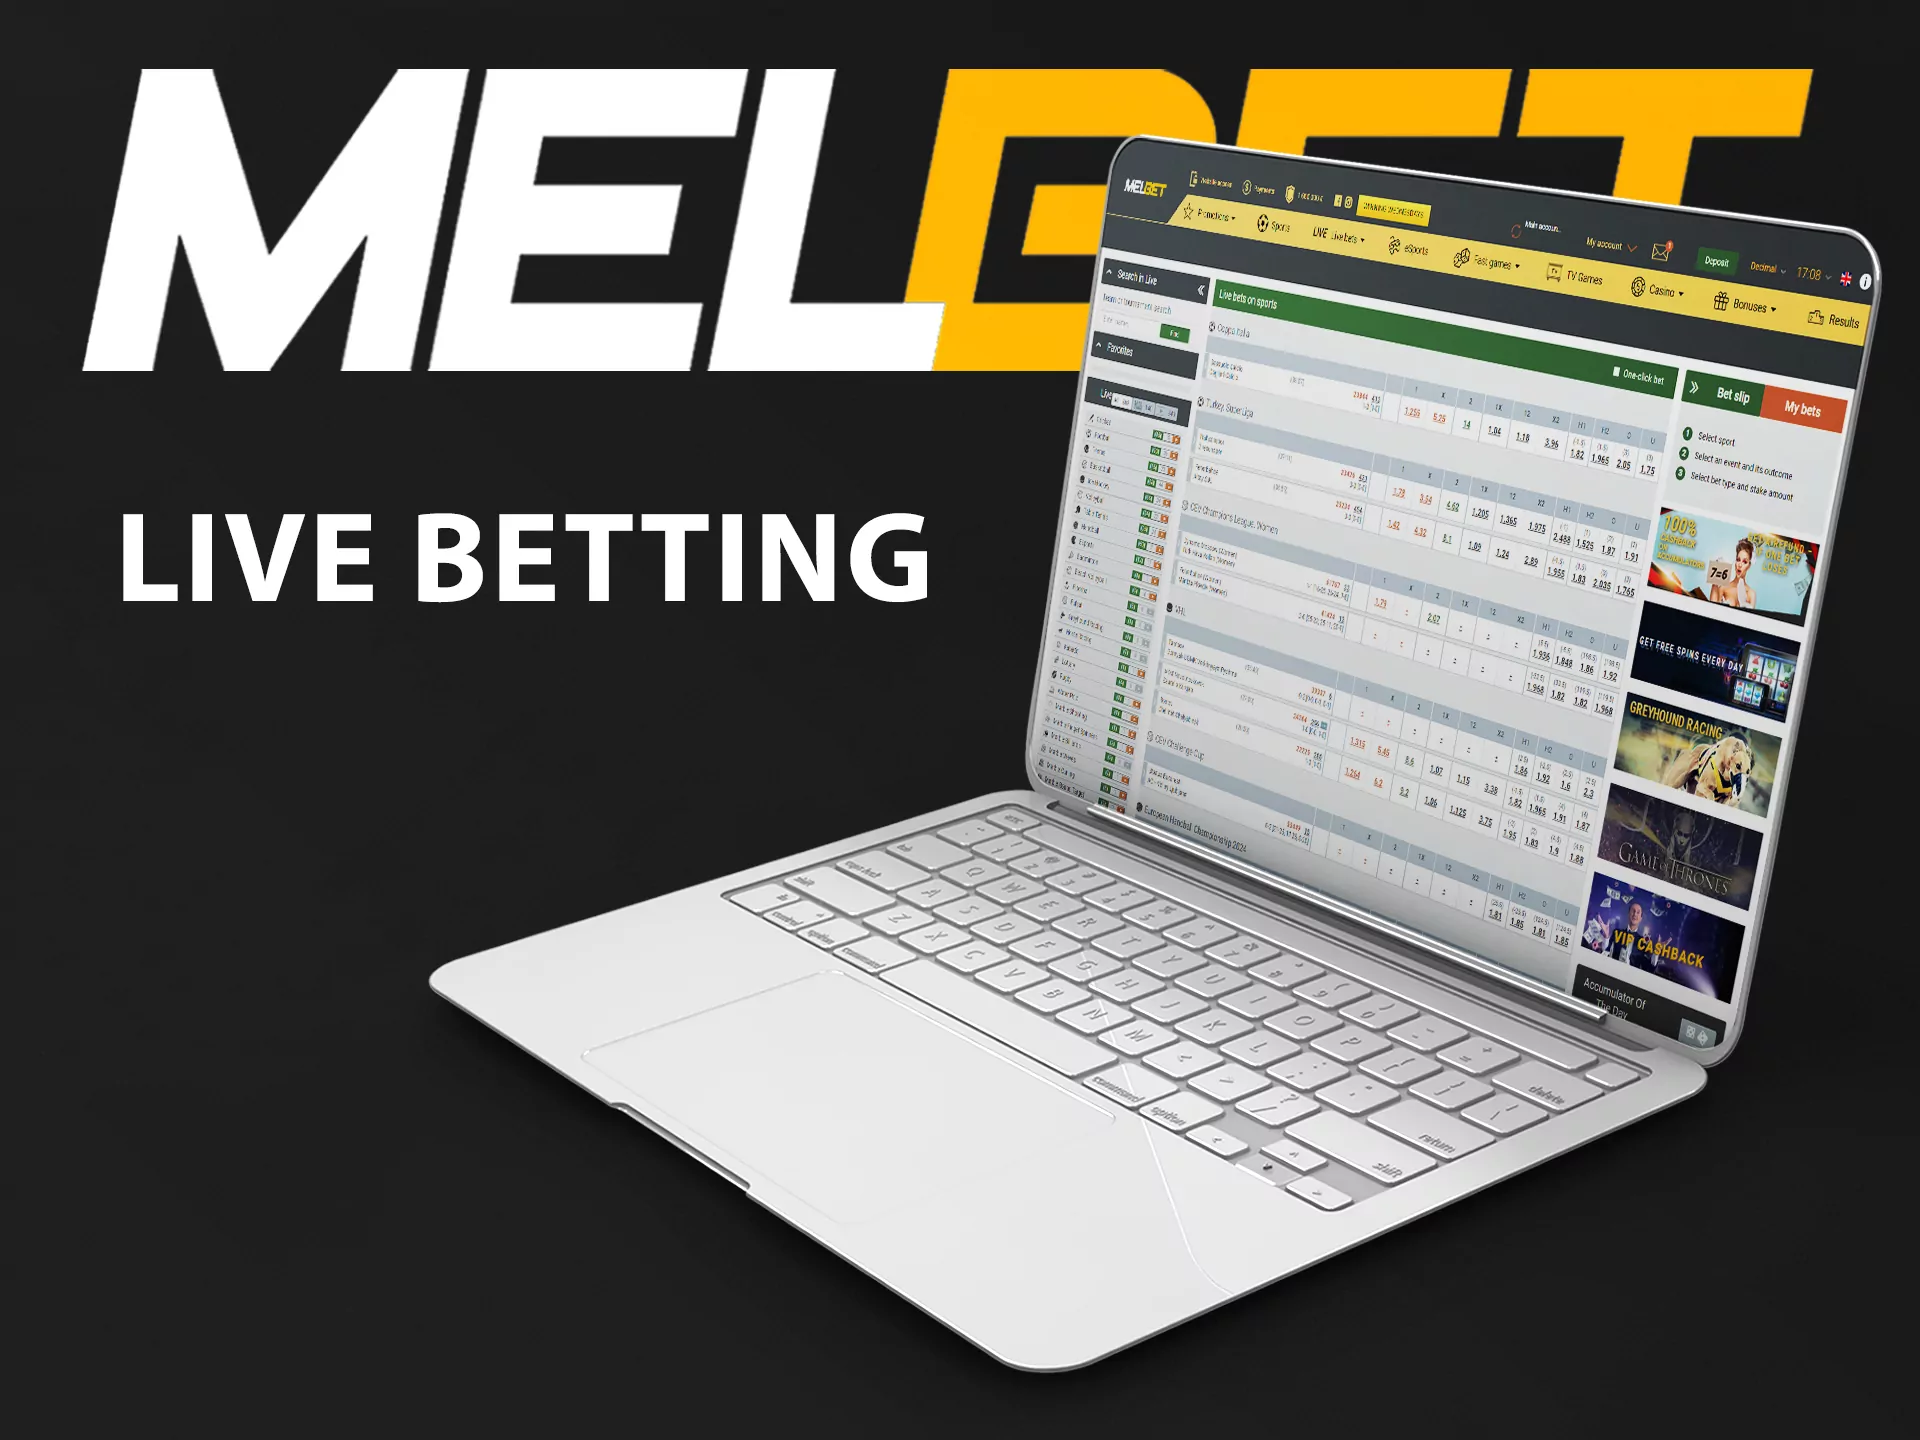 Live betting is an additional feature made by Melbet for sports and esports betting users.